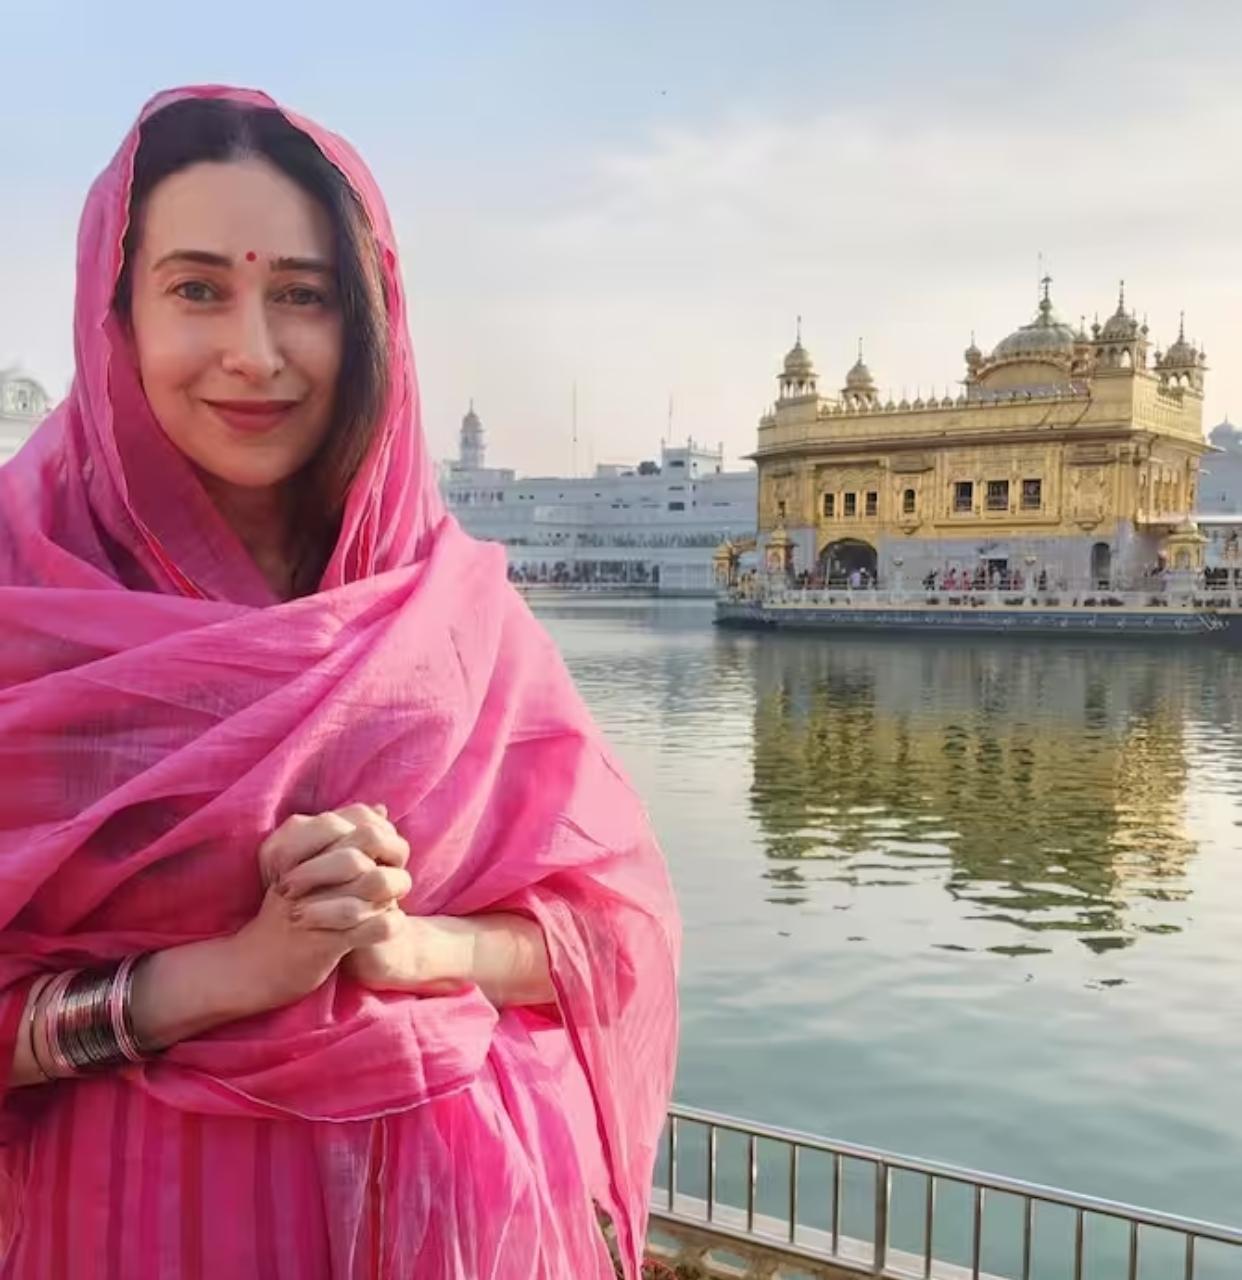 Karisma Kapoor recently visited the Golden Temple. She looked pretty in a pink outfit (Source/Karisma Kapoor Instagram)